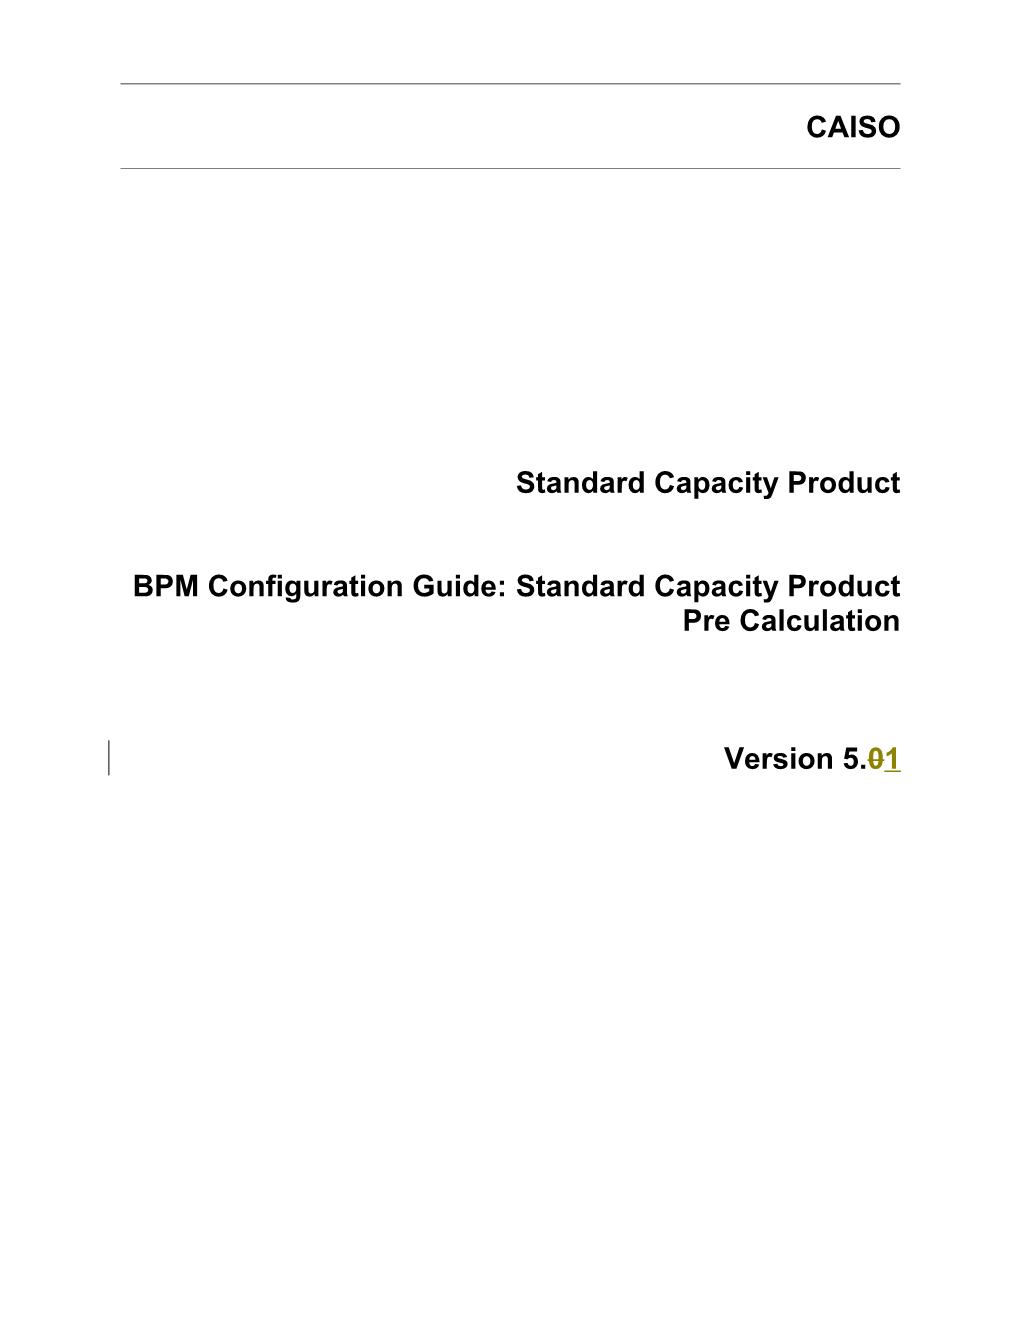 Standard Capacity Product Pre Calculation